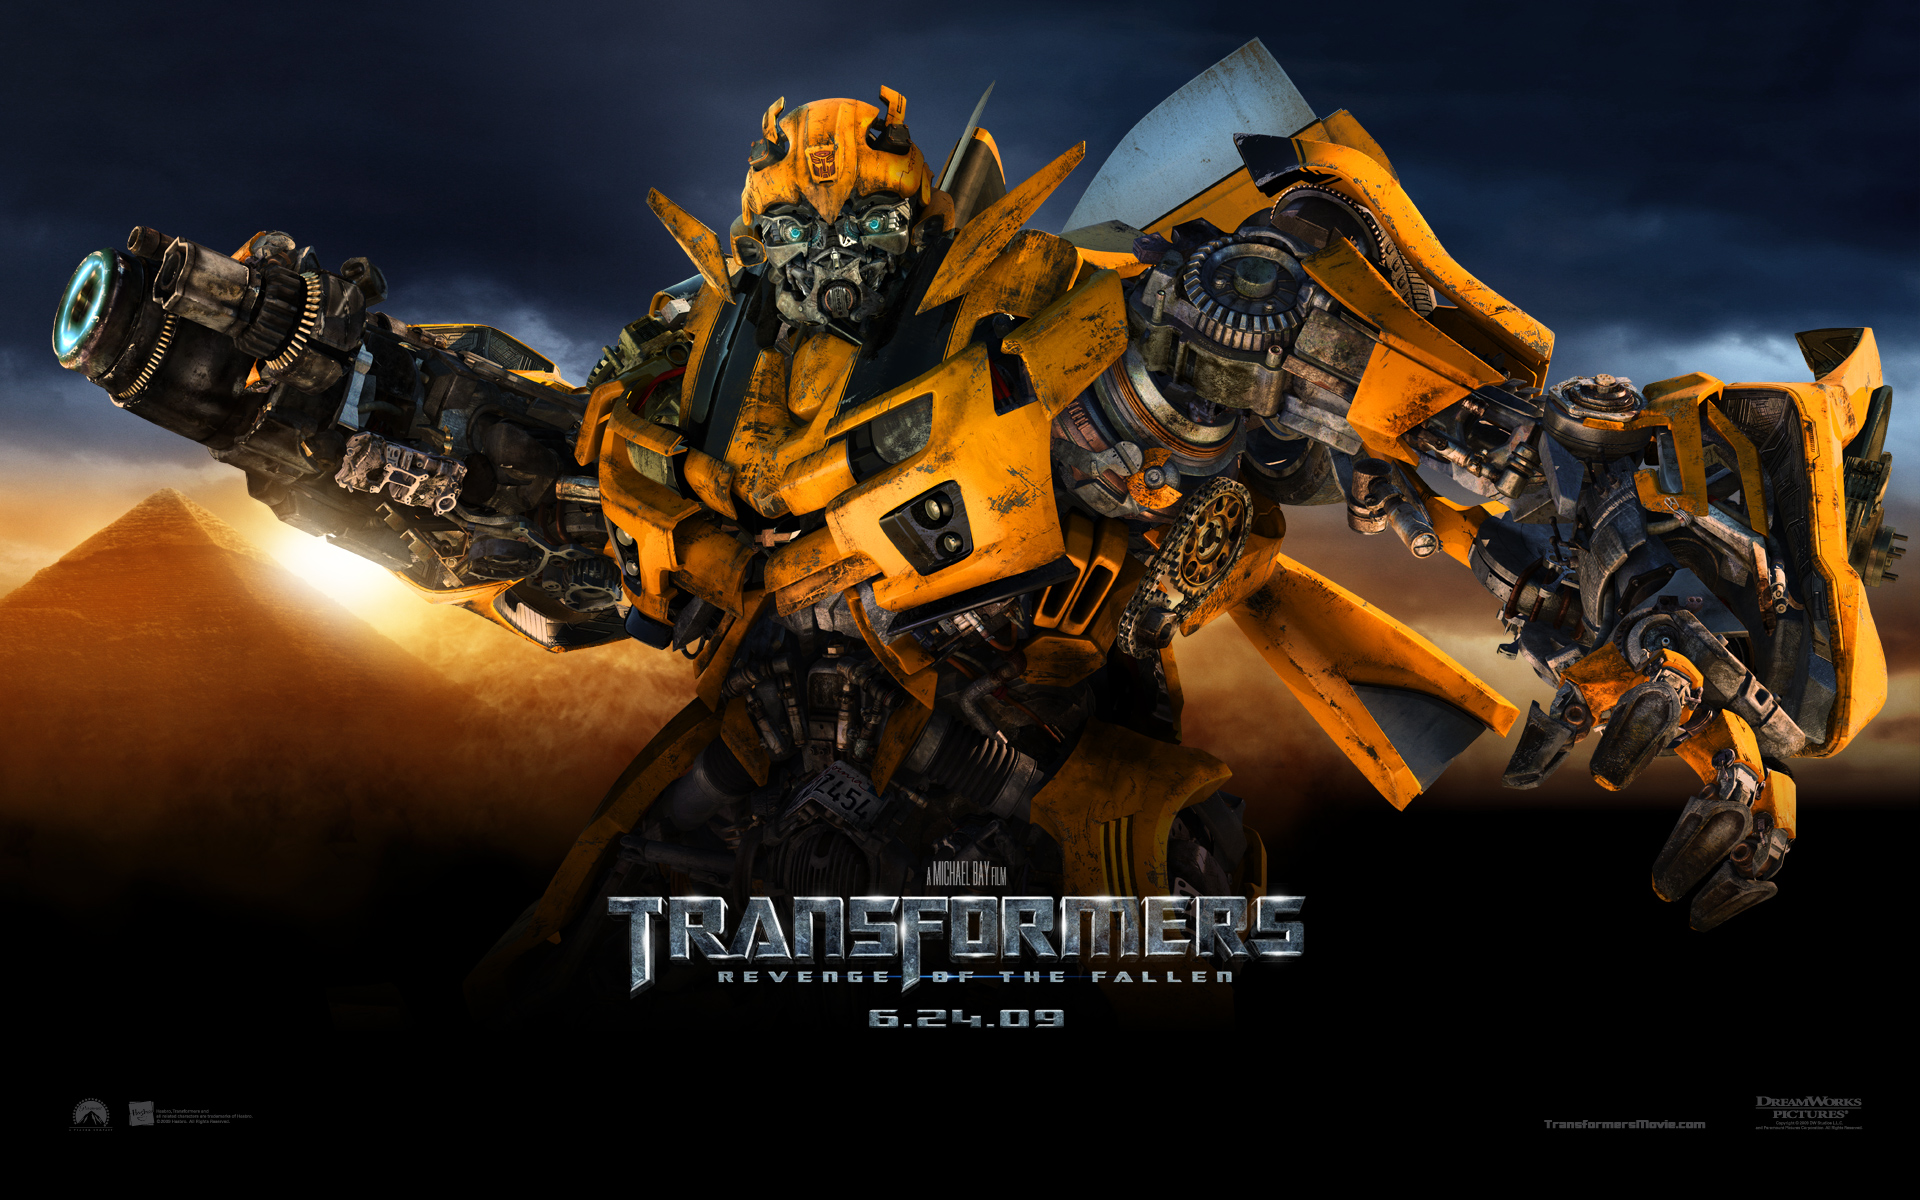  Transformers wallpapers that I have missed be sure to link it in the 1920x1200